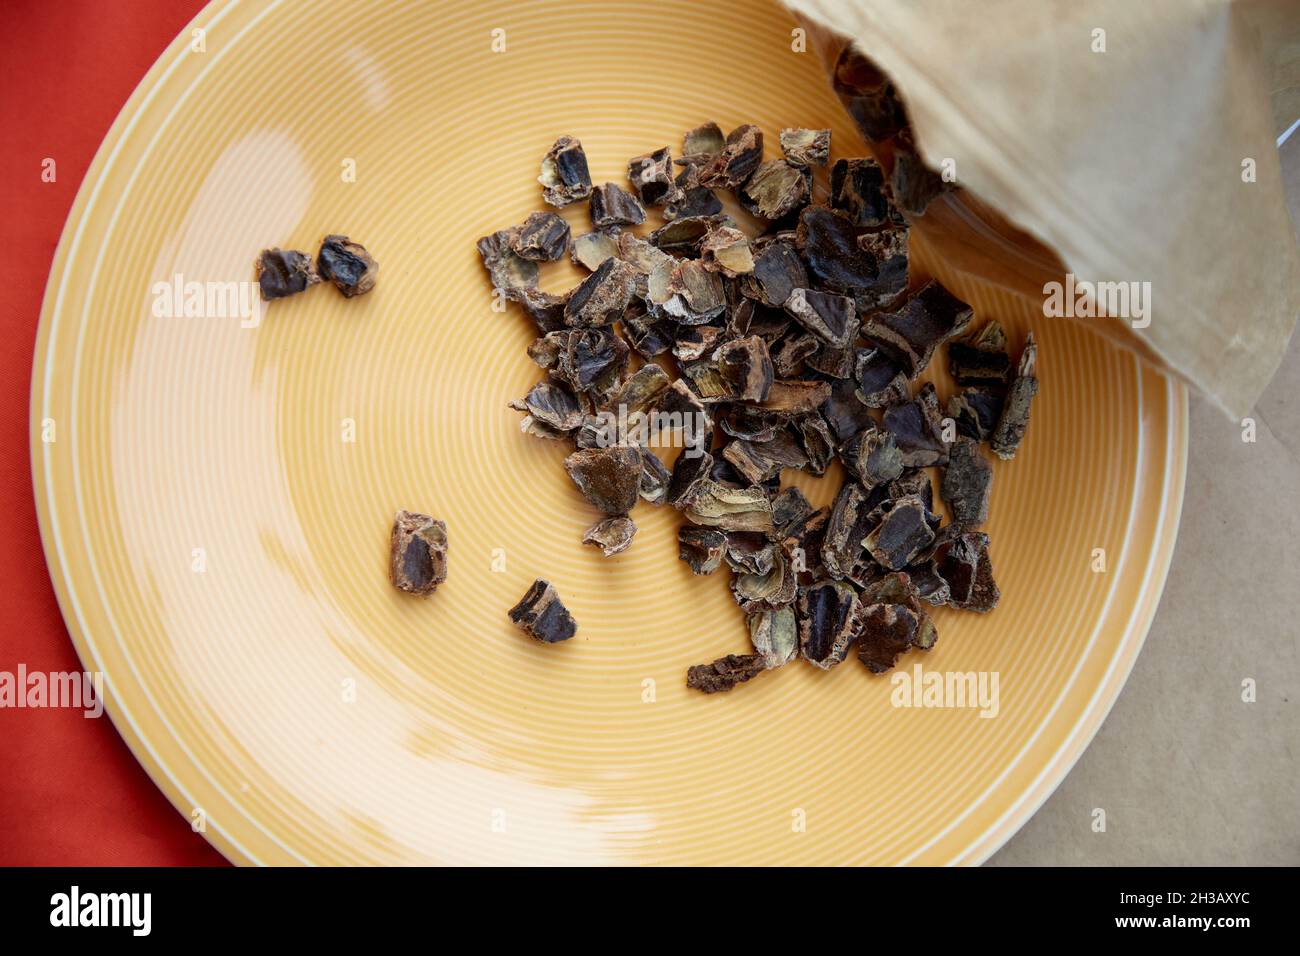 Carob - plant-based caffeine alternative - natural product on the plate. Organic antioxidants. Top view, copy space. High quality photo Stock Photo